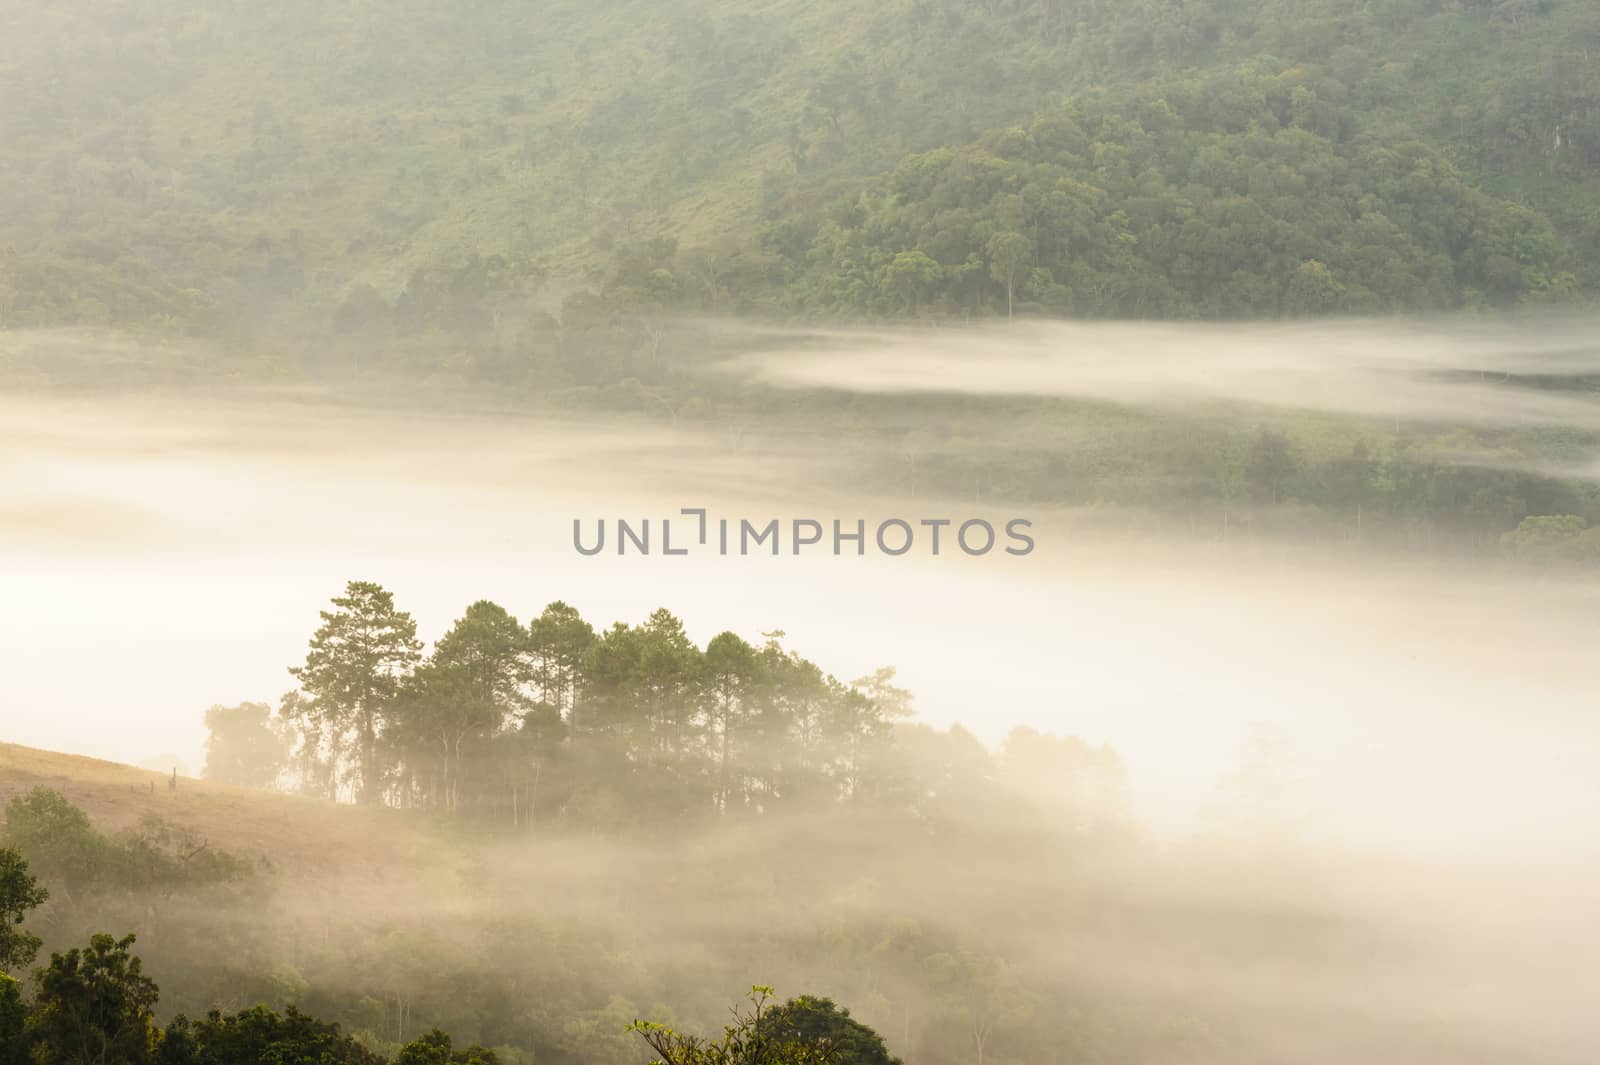 Tropical forest misty. by ngungfoto